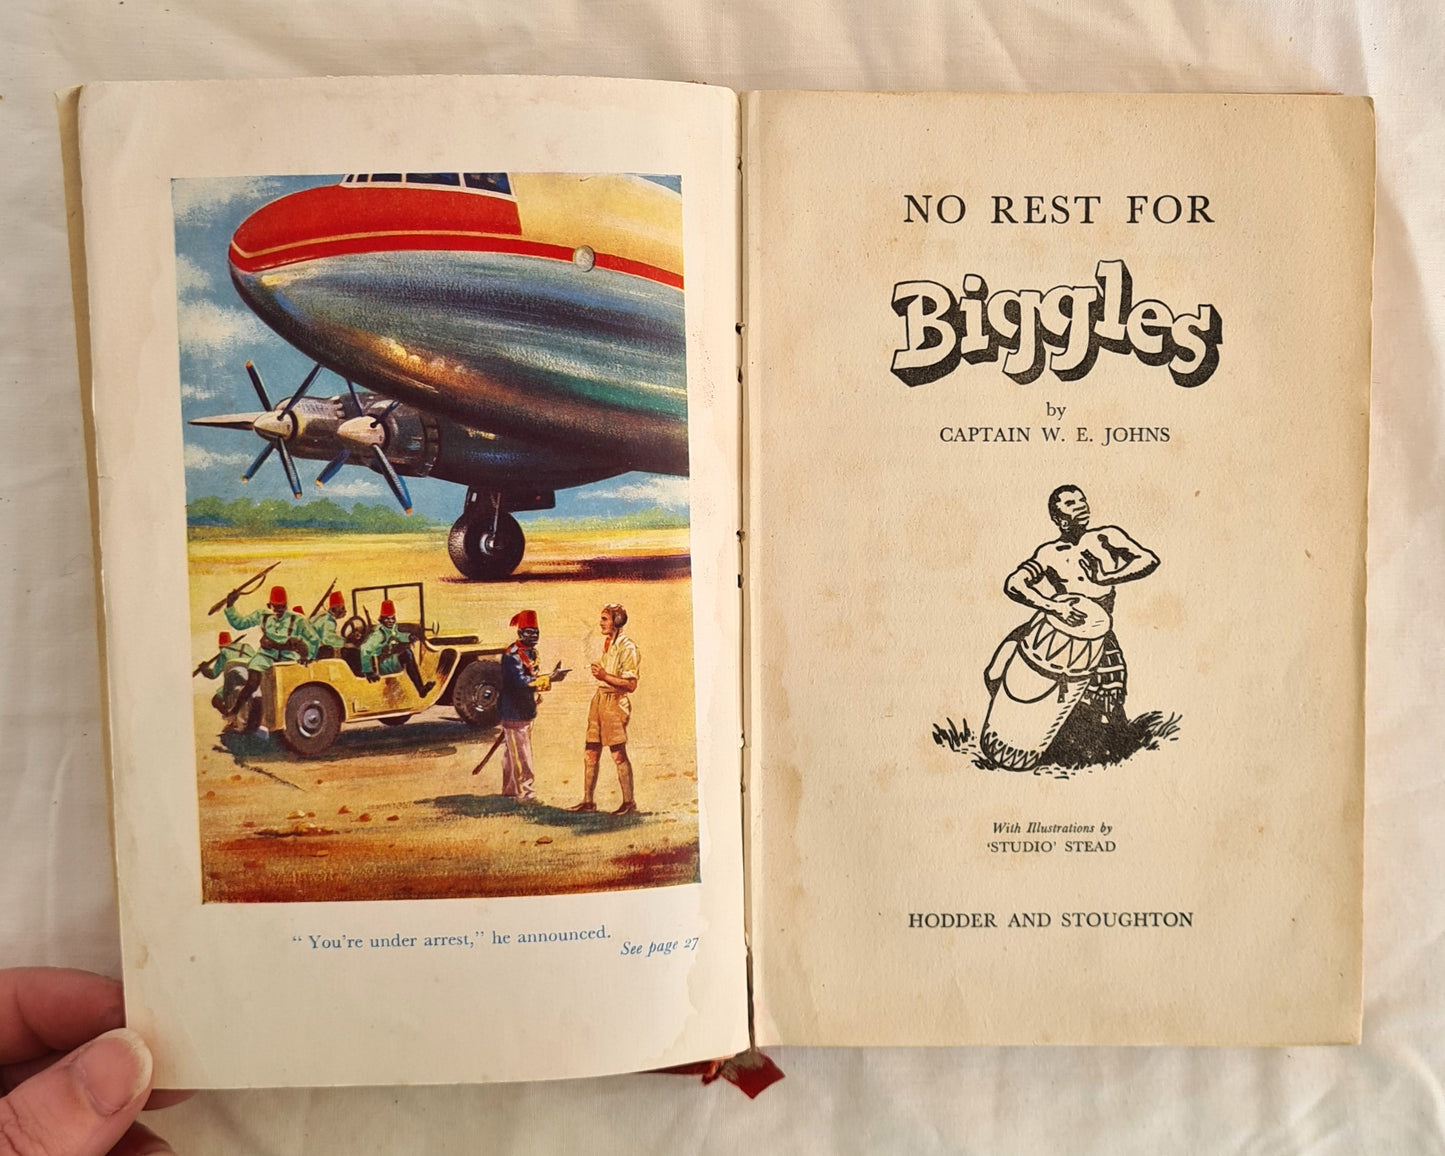 No Rest for Biggles  by Captain W. E. Johns  illustrated by ‘Studio’ Stead